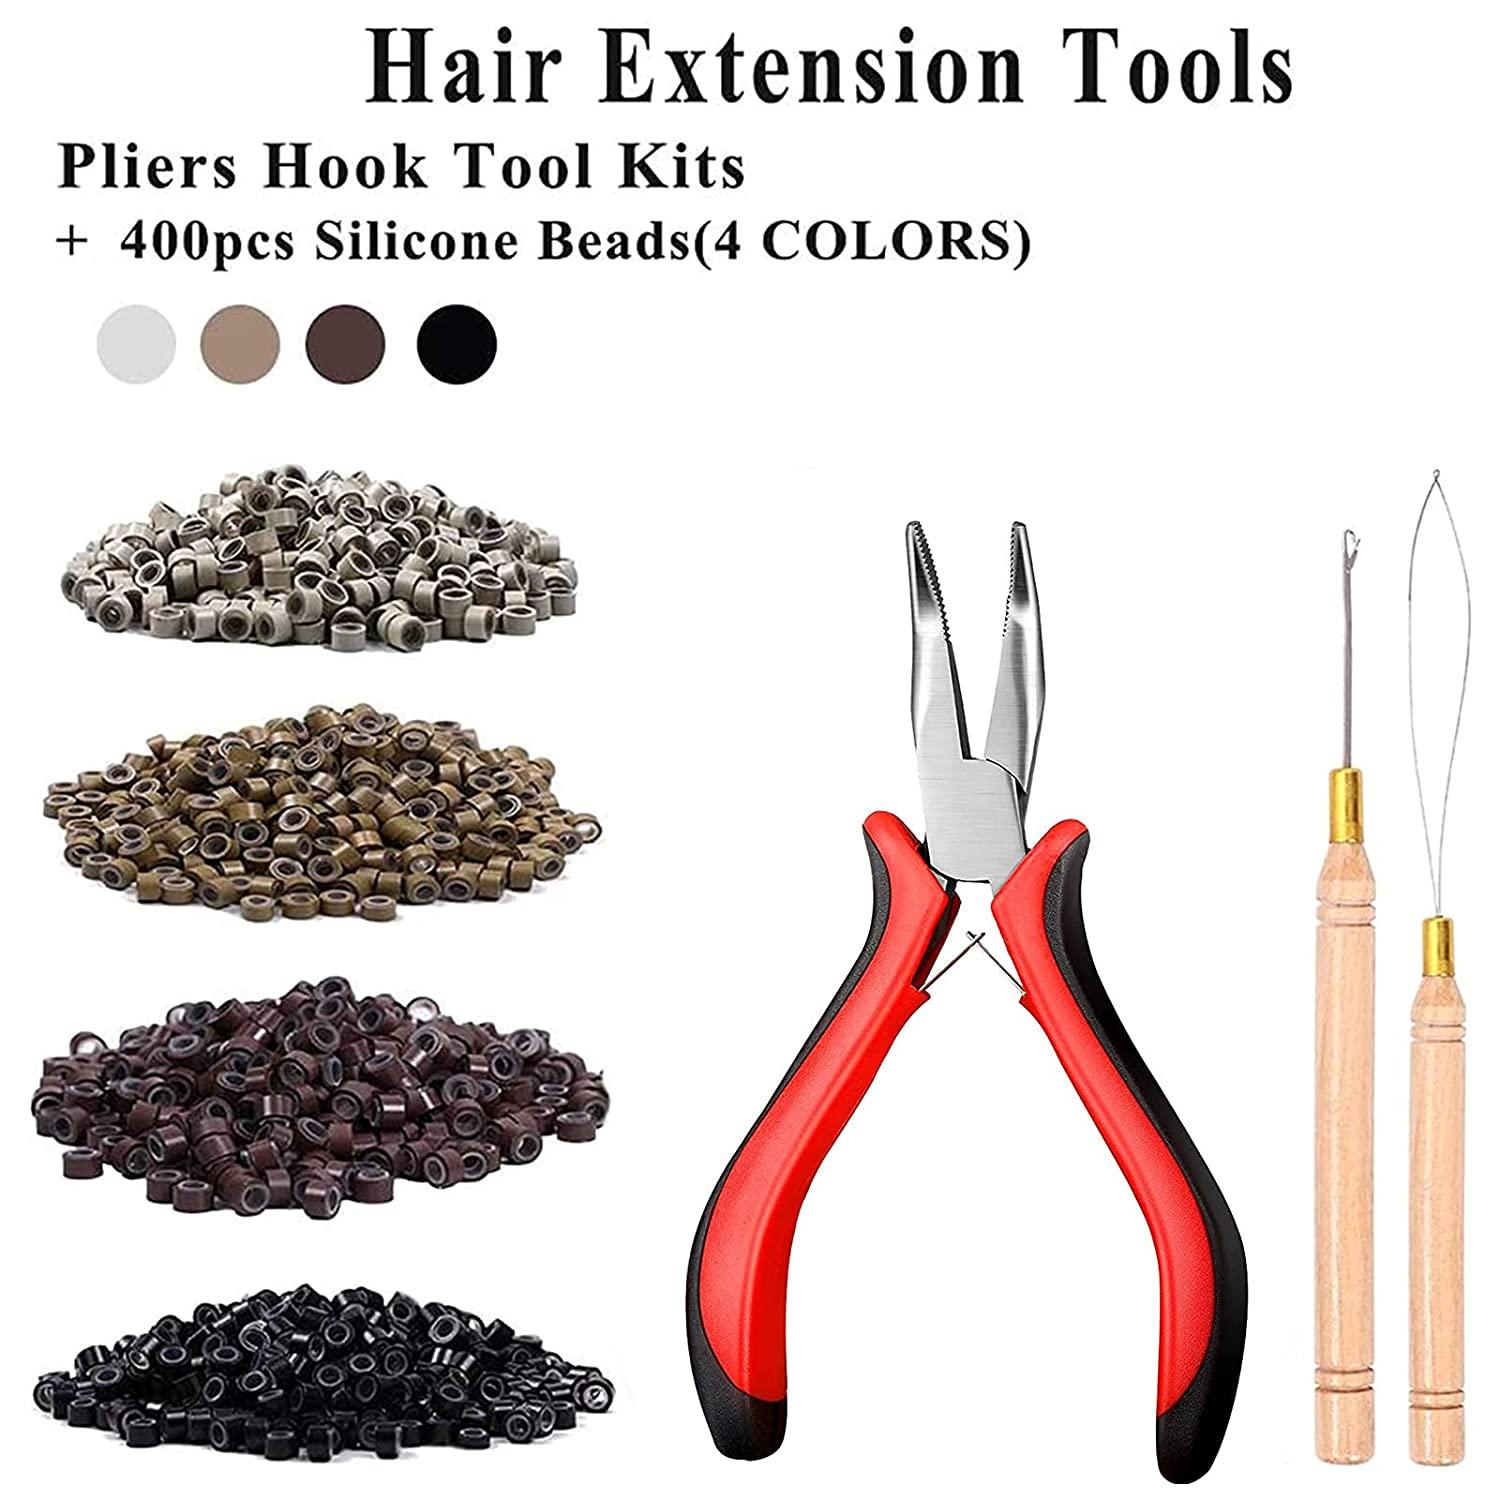 2 in 1 Hair Extension Tools, Includes Loop Needle Threader